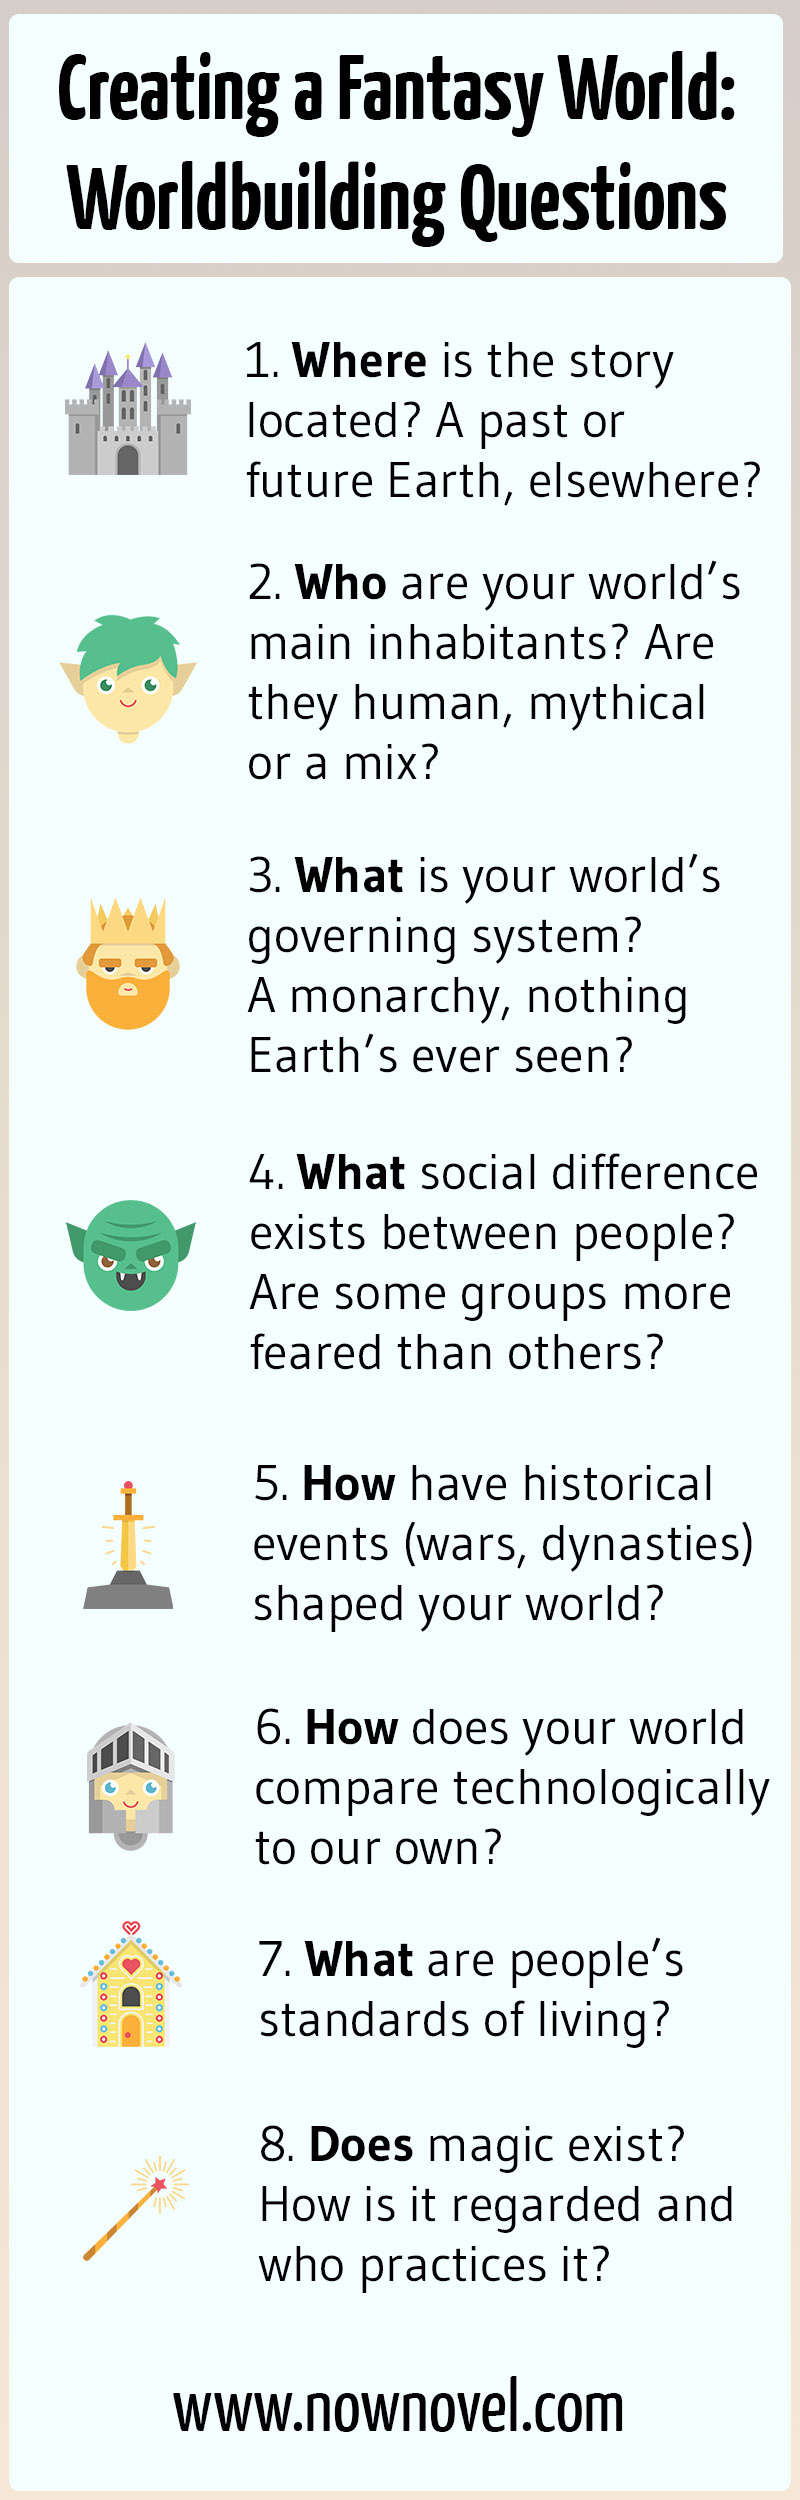 Infographic: Fantasy worldbuilding questions | Now Novel